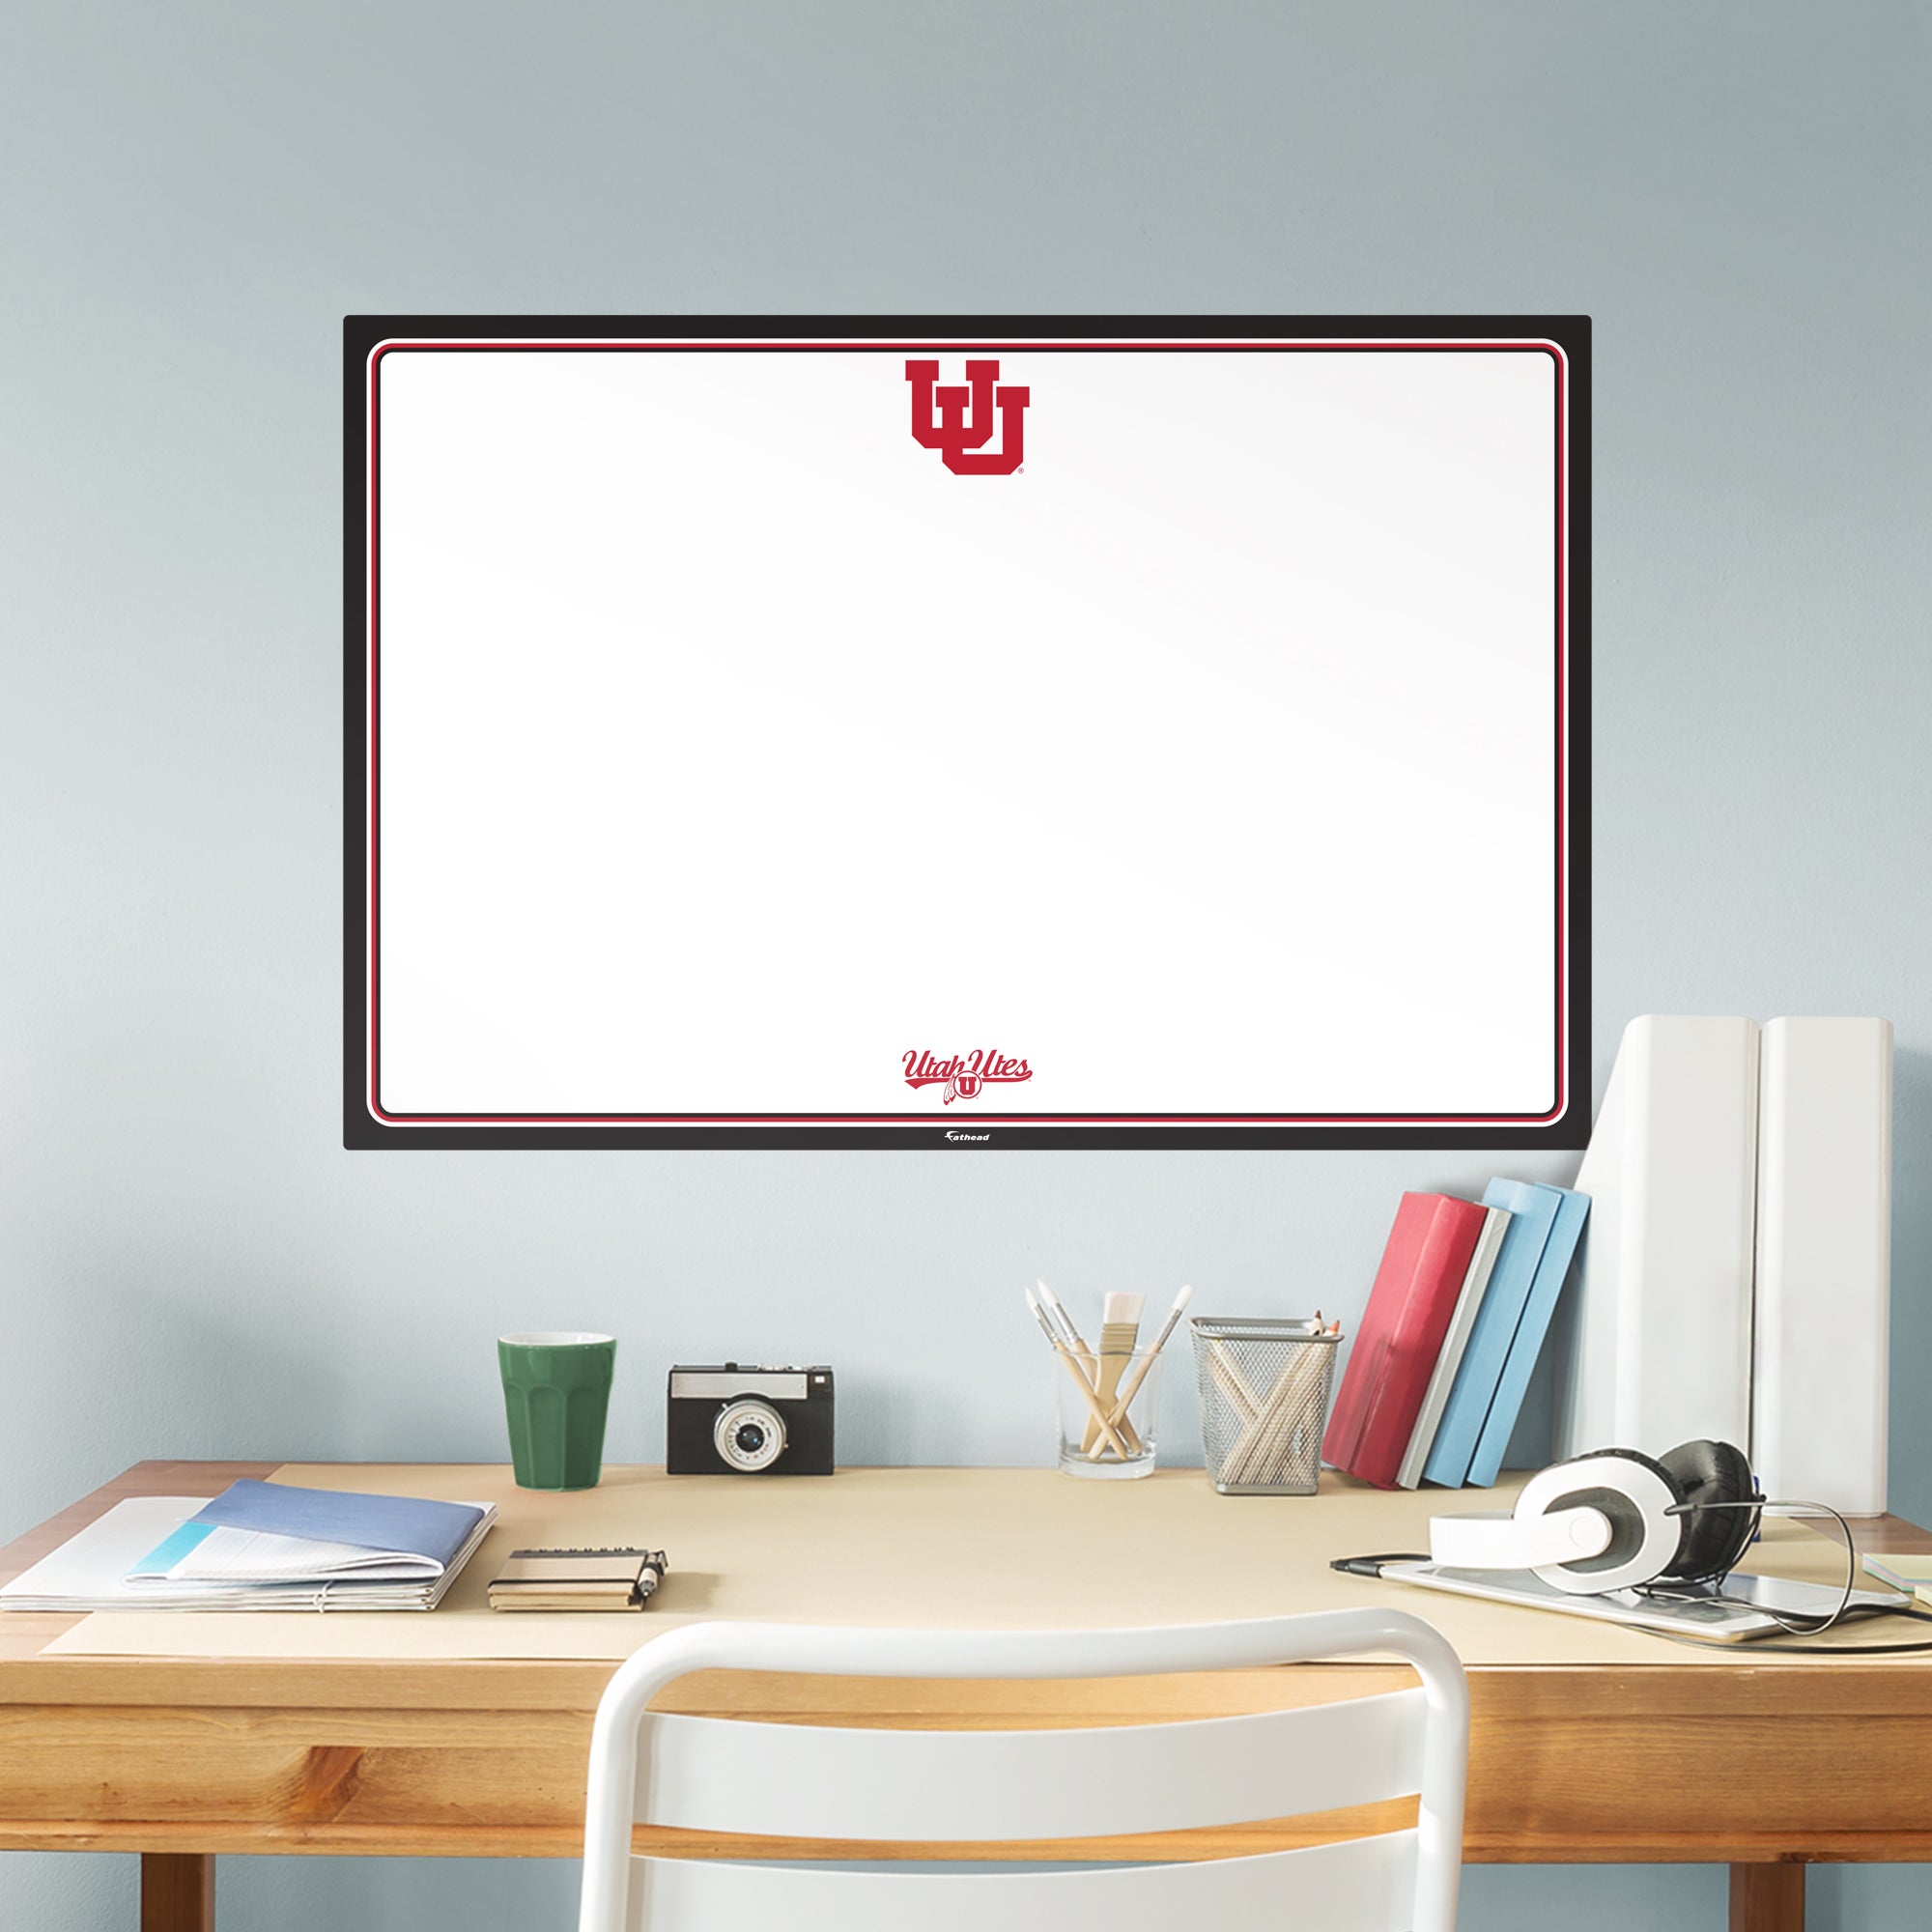 Utah Utes: Dry Erase Whiteboard - X-Large Officially Licensed NCAA Removable Wall Decal XL by Fathead | Vinyl